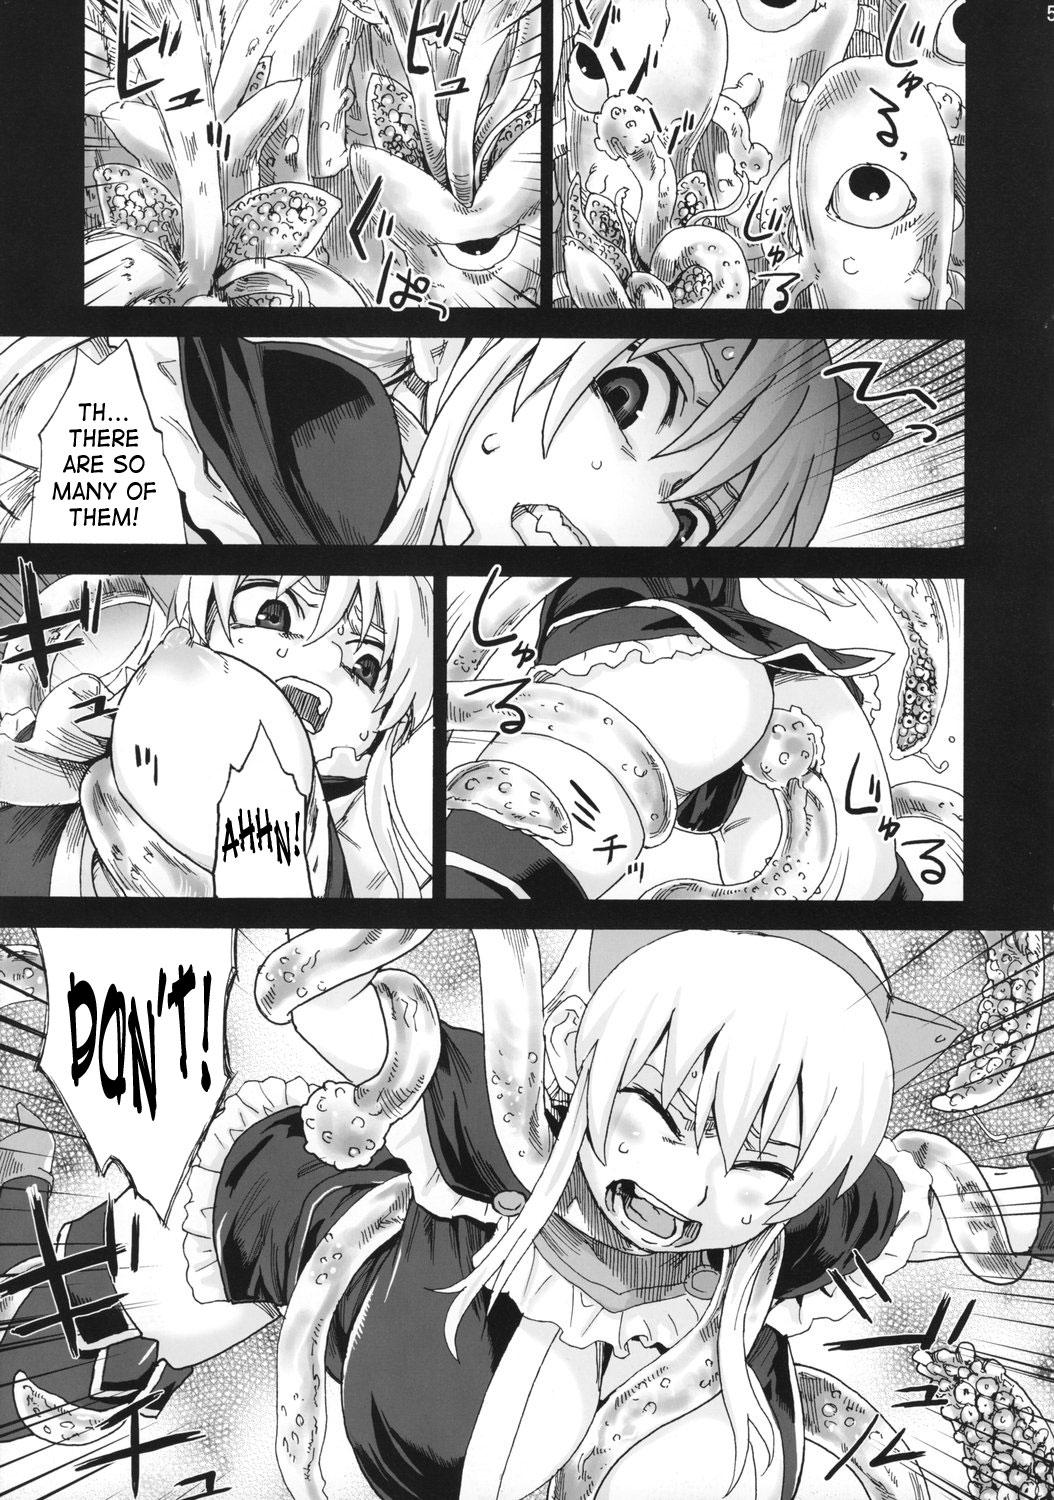 Penis Victim Girls 5 - She zaps to... - Tower of druaga Glasses - Page 4